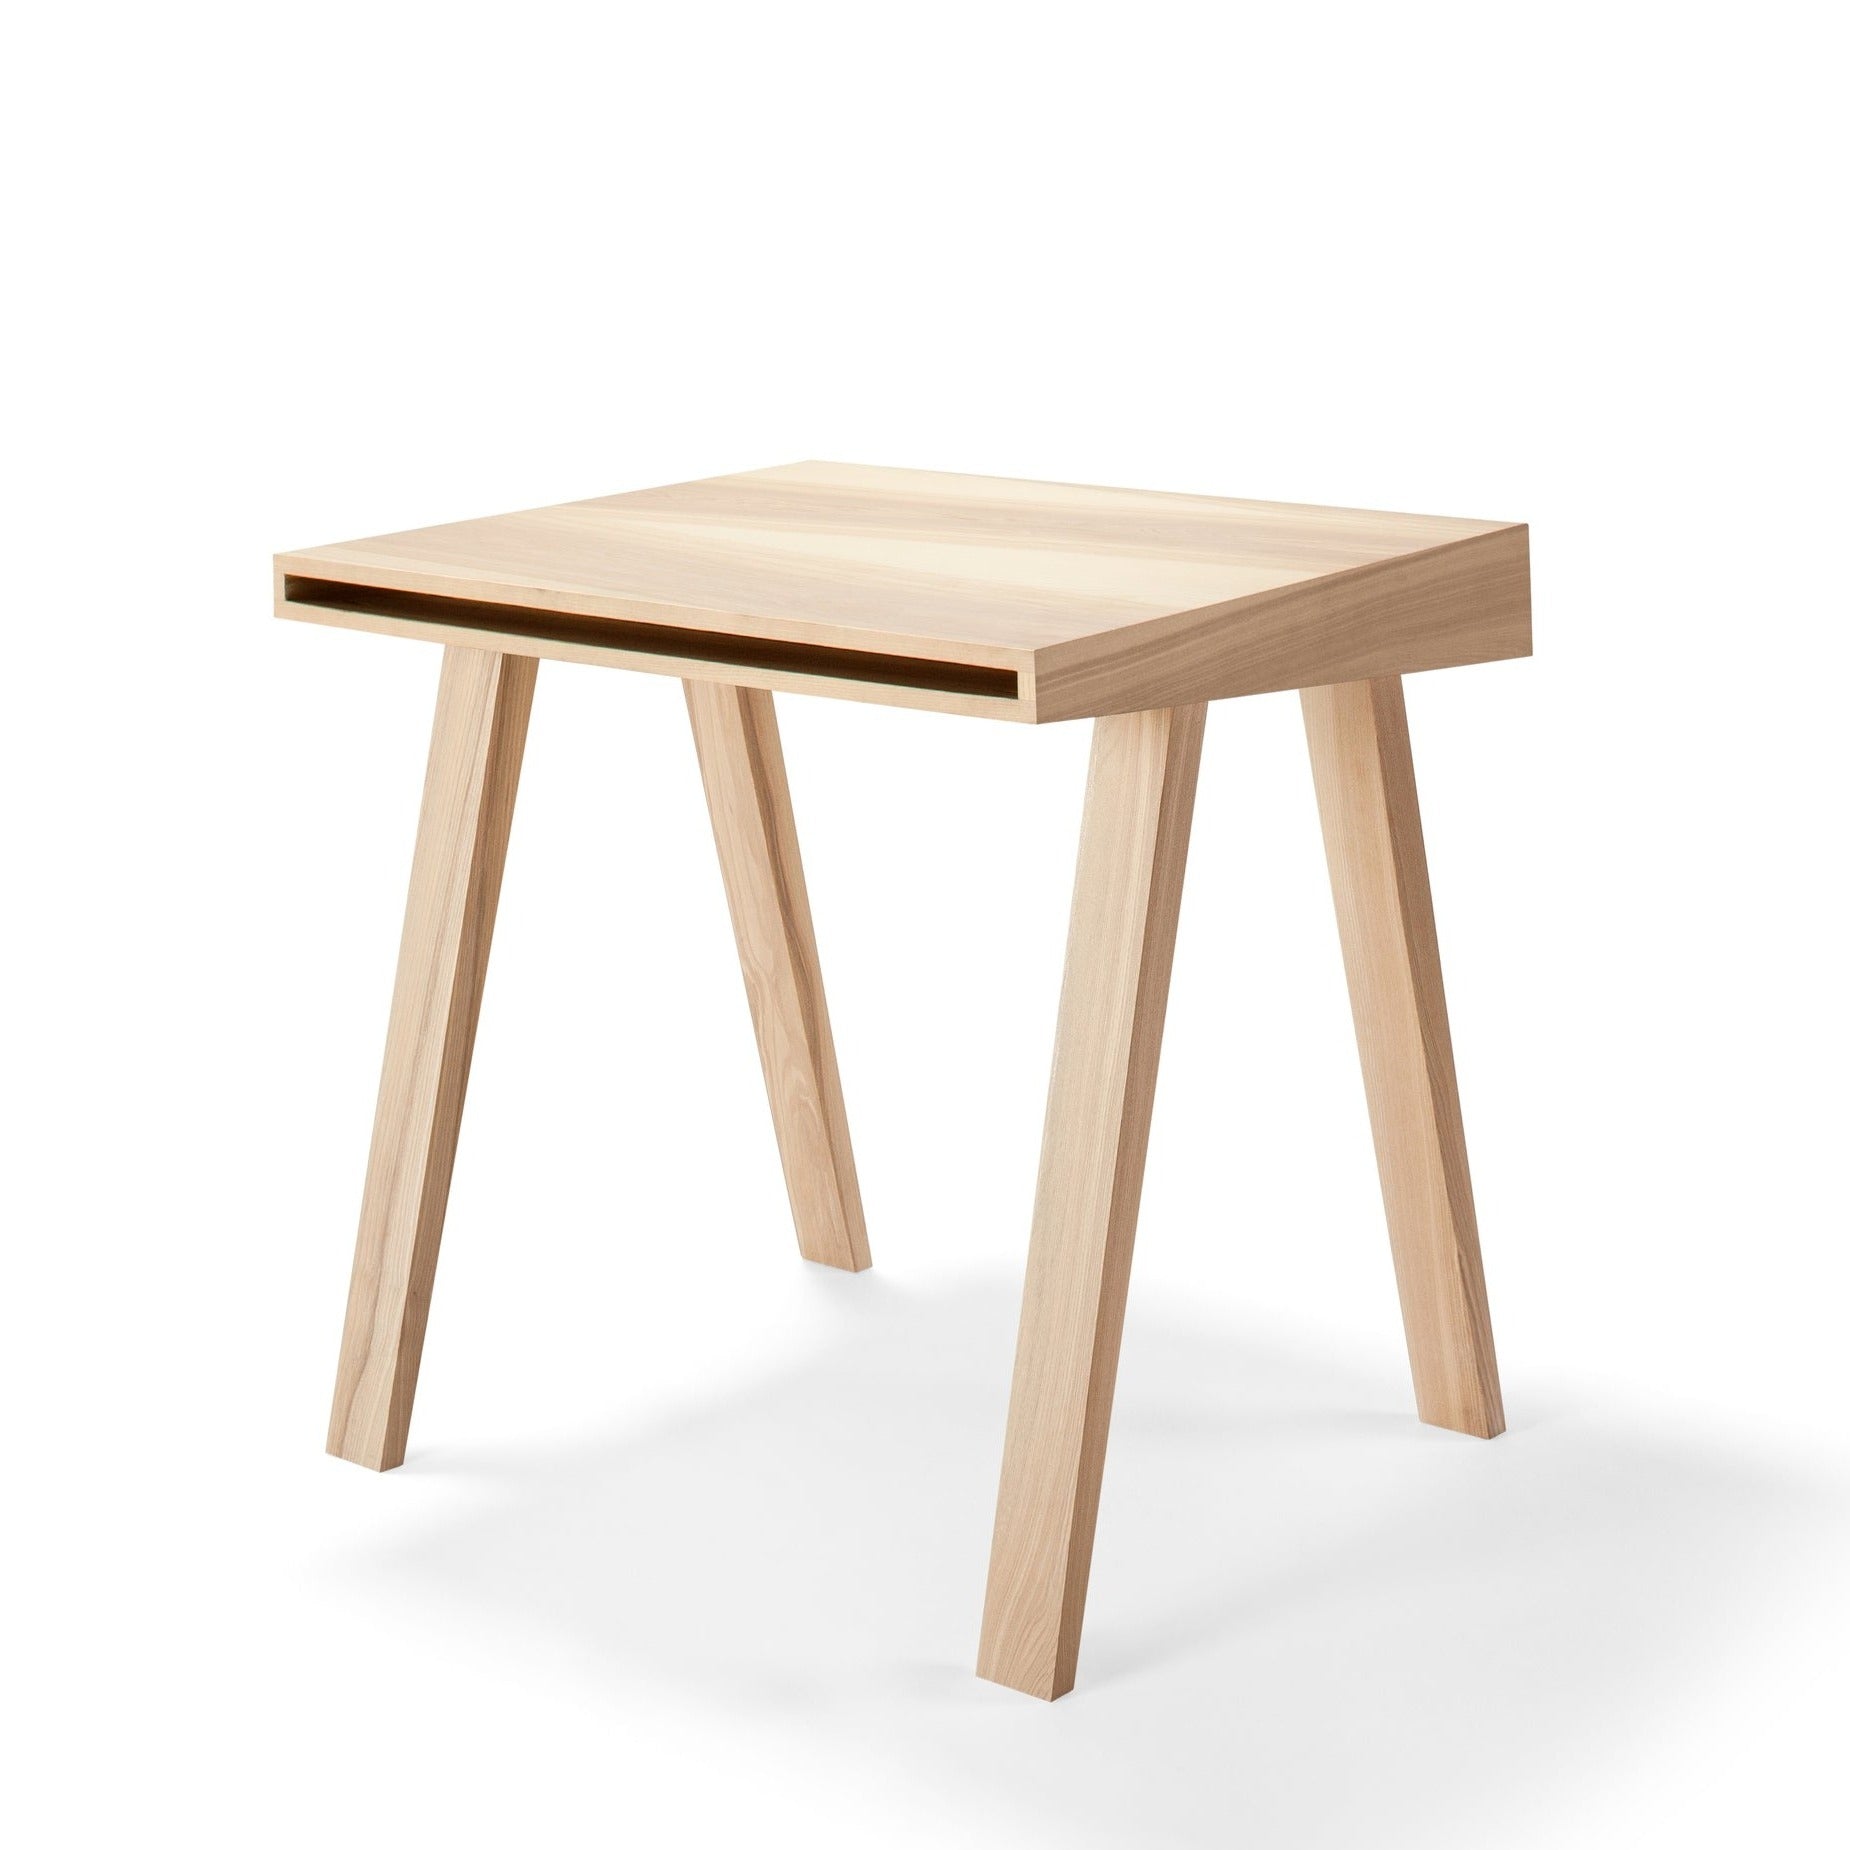 4.9 Desk natural ash small size-one drawer